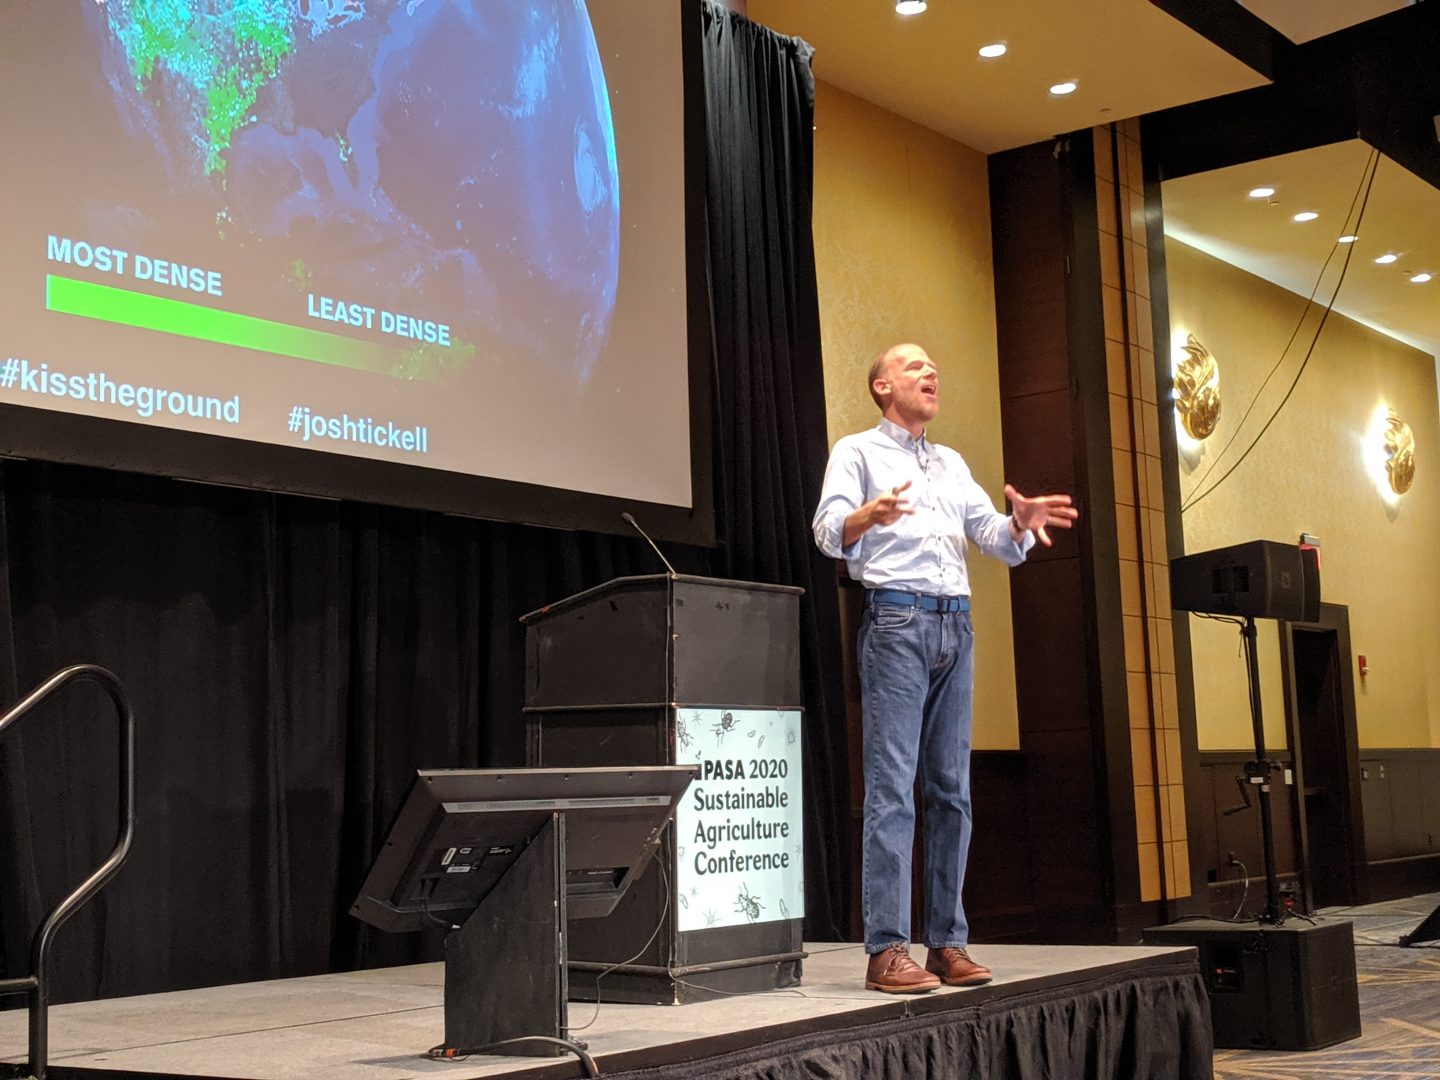 Author and documentary film maker Josh Tickell gives the keynote presentation at the PASA Sustainable Agriculture Conference in Lancaster on Thursday, Feb. 6, 2020. 